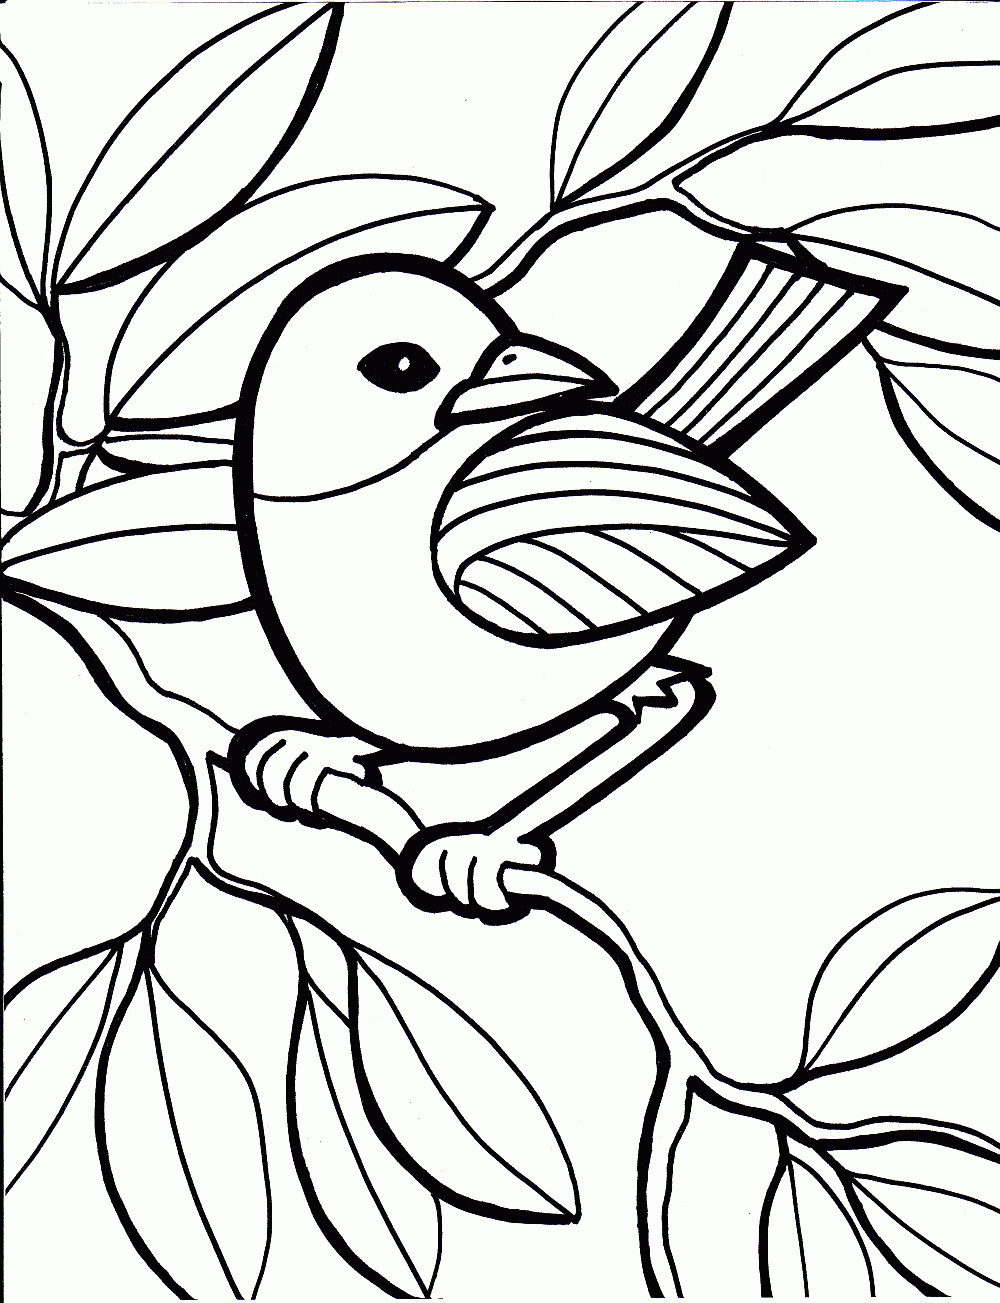 Get Free Printable Coloring Pages For Seniors With Dementia – Home